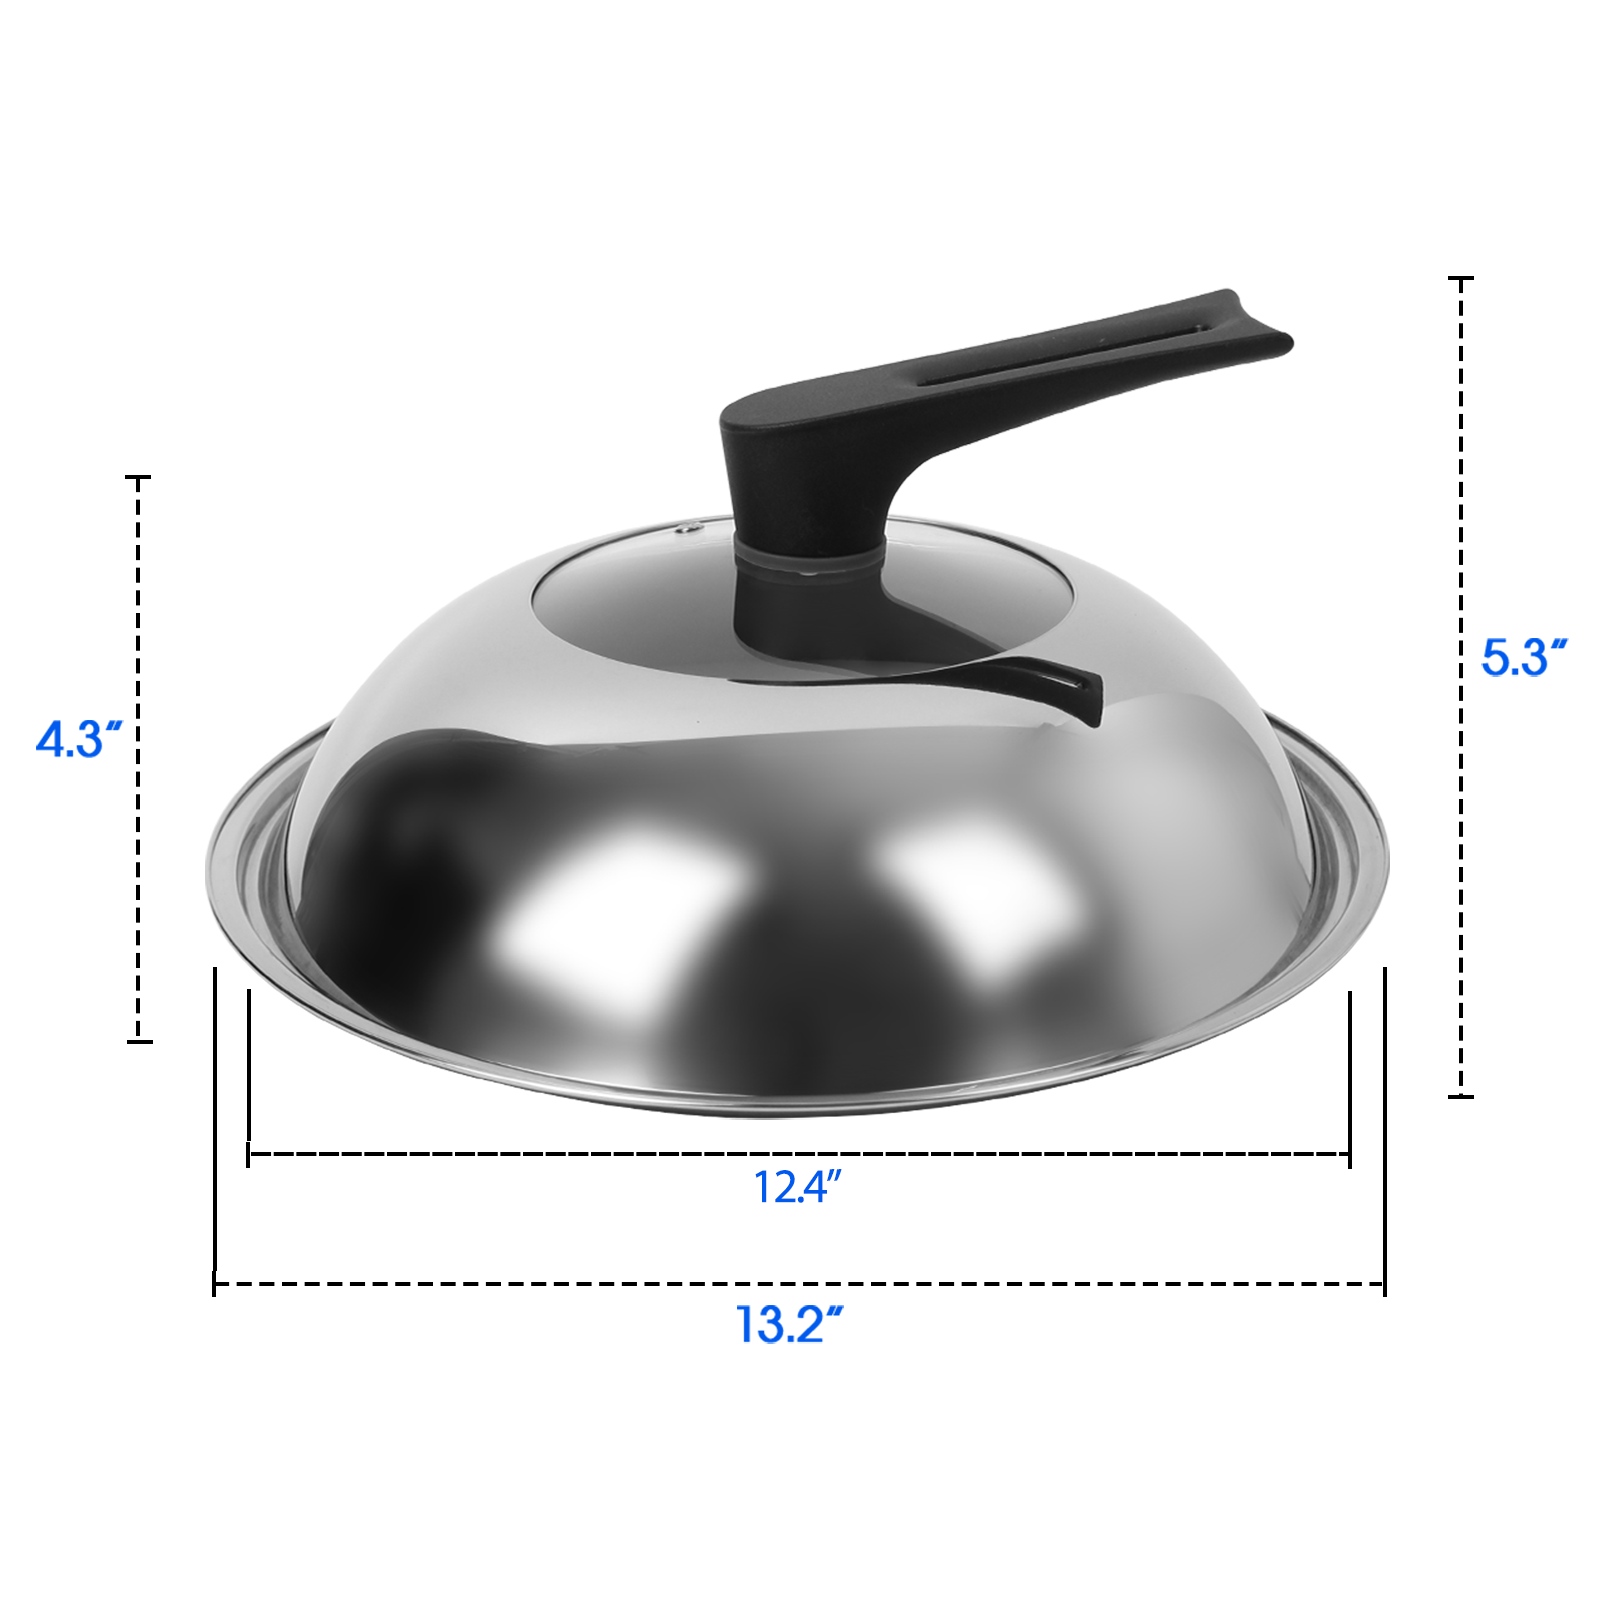 Wok Lid 13.2 Inch Universal Lid, Frying Pot 304 stainless steel lid with a tempered glass window Frying Pot Cover, Cookware Lids Replacement Lid with Handle - Mirror Appearance